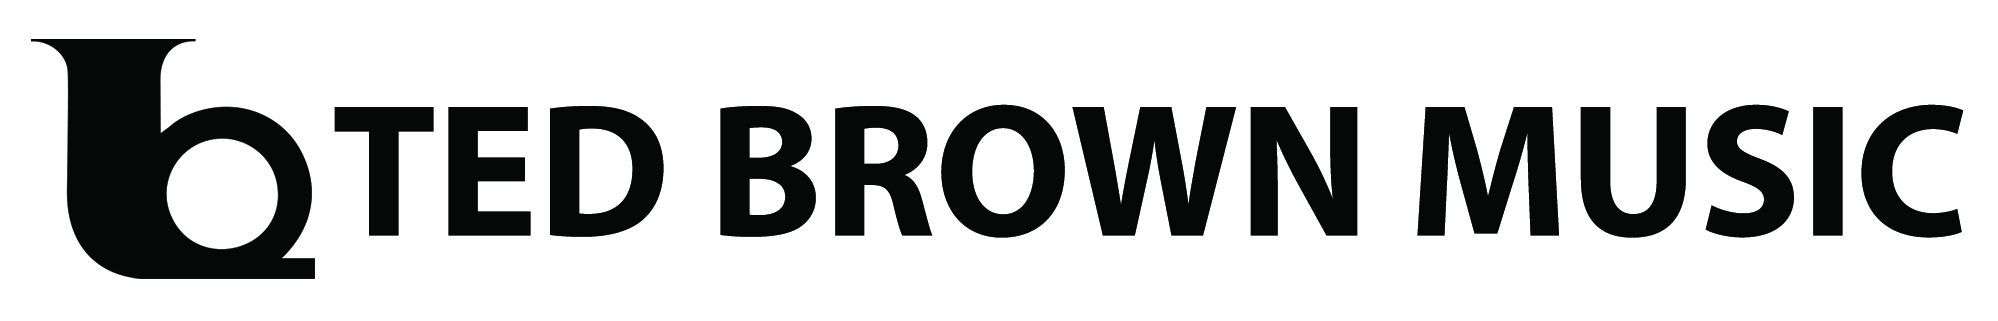 Ted Brown Music Company Logo